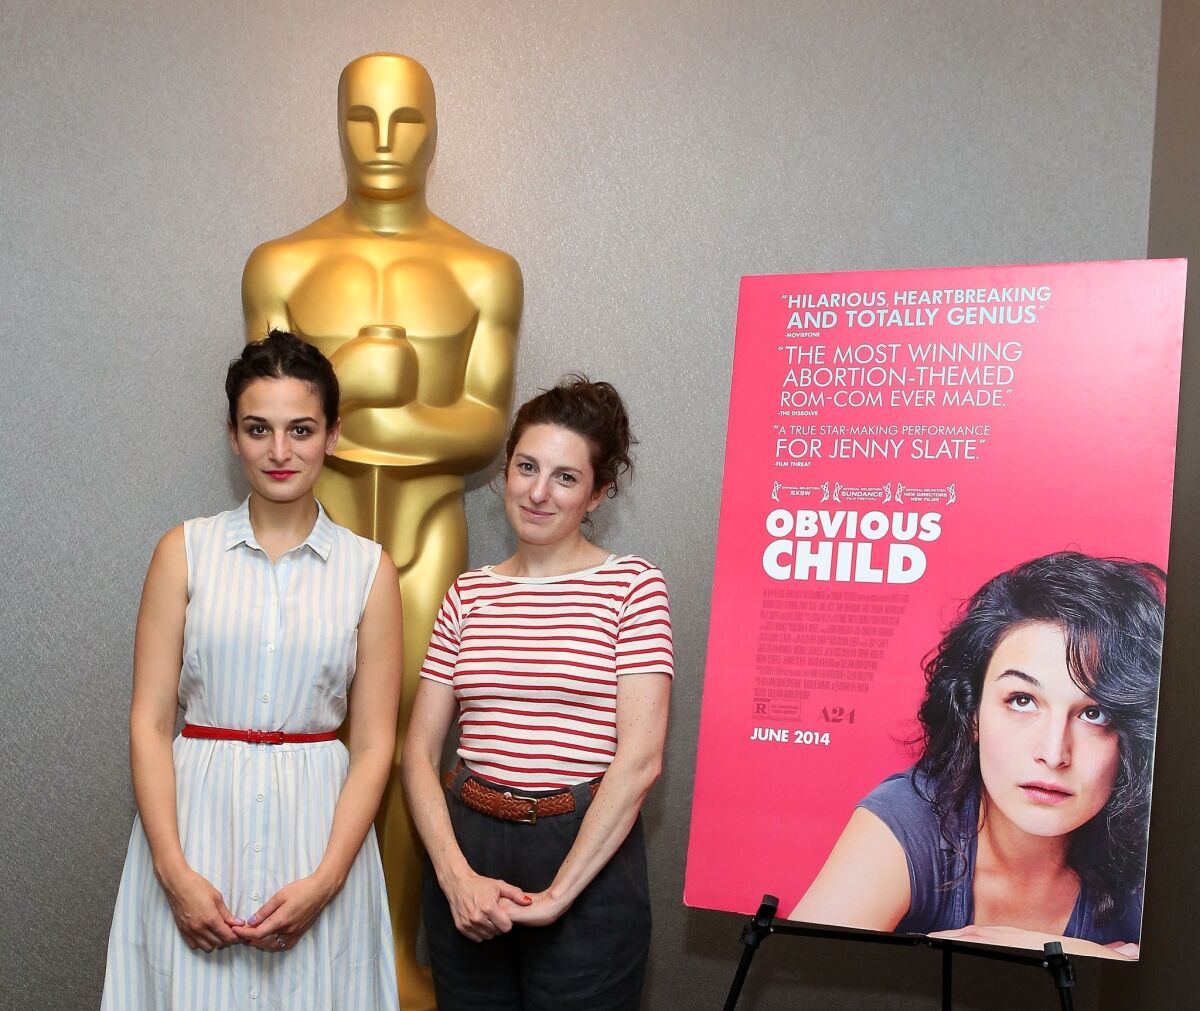 Jenny Slate, left, and Gillian Robespierre attend The Academy Of Motion Picture Arts And Sciences' screening Of "Obvious Child" in New York City.